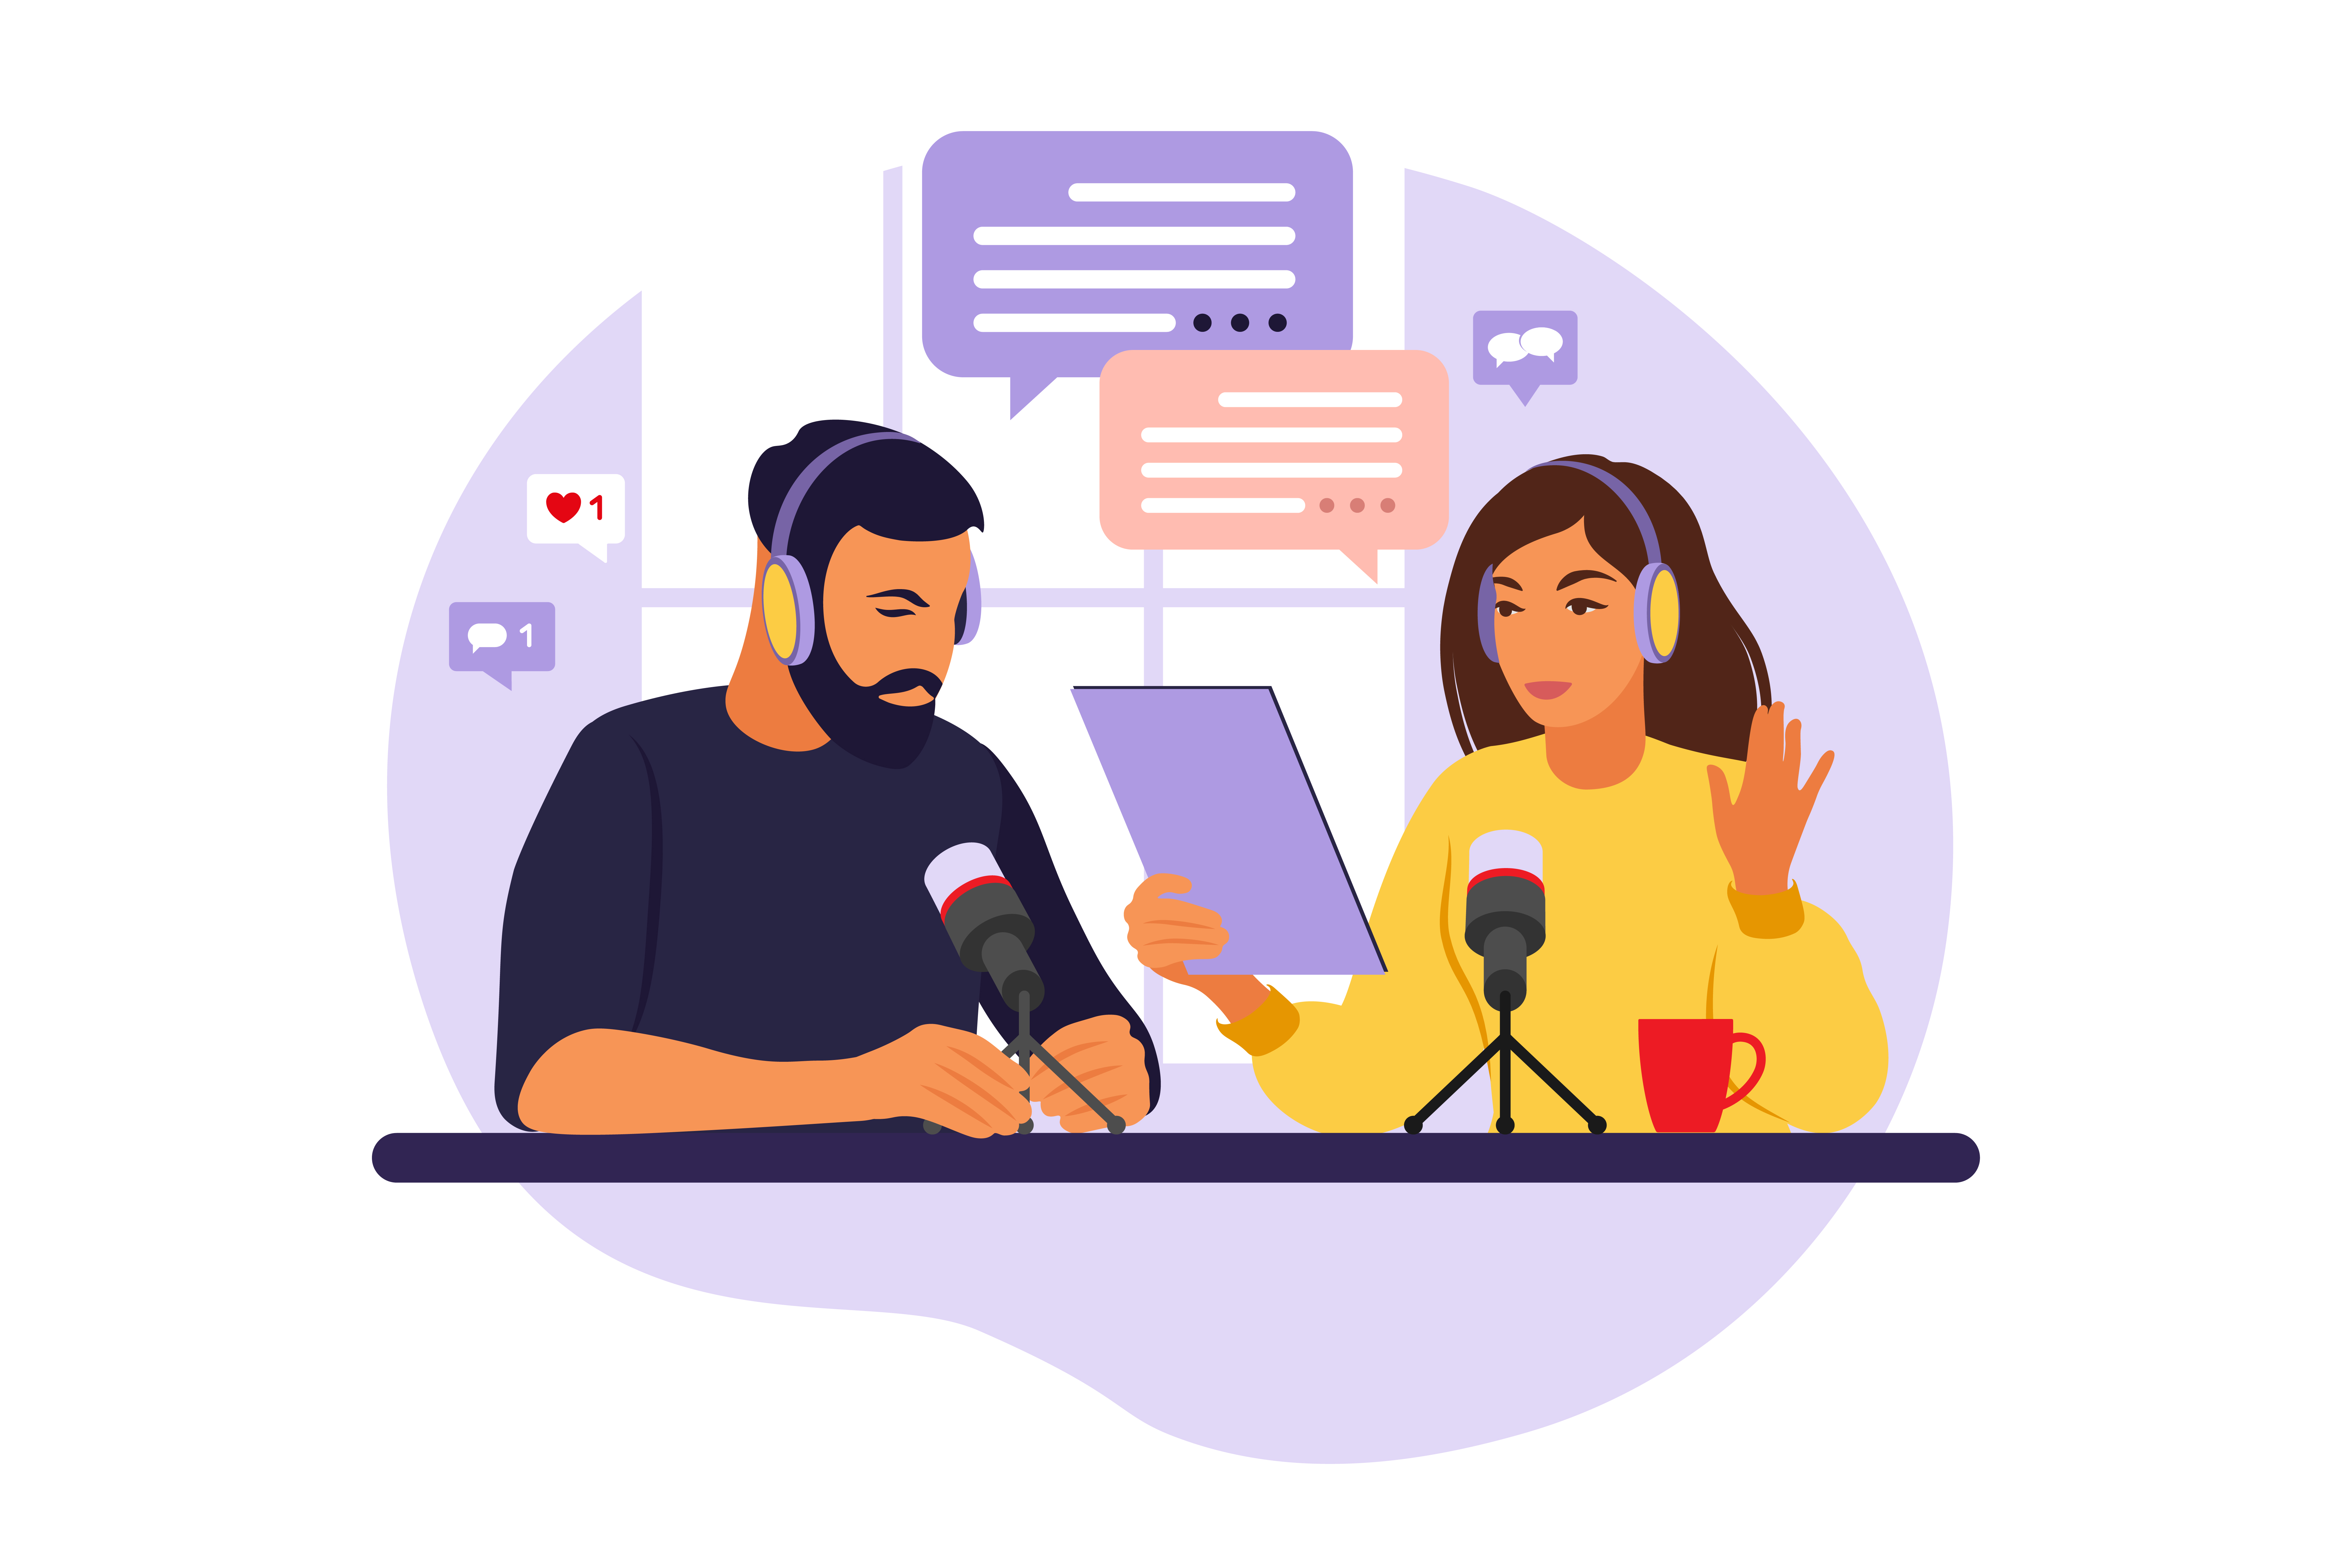 Podcast business - Man and woman recording podcast purple